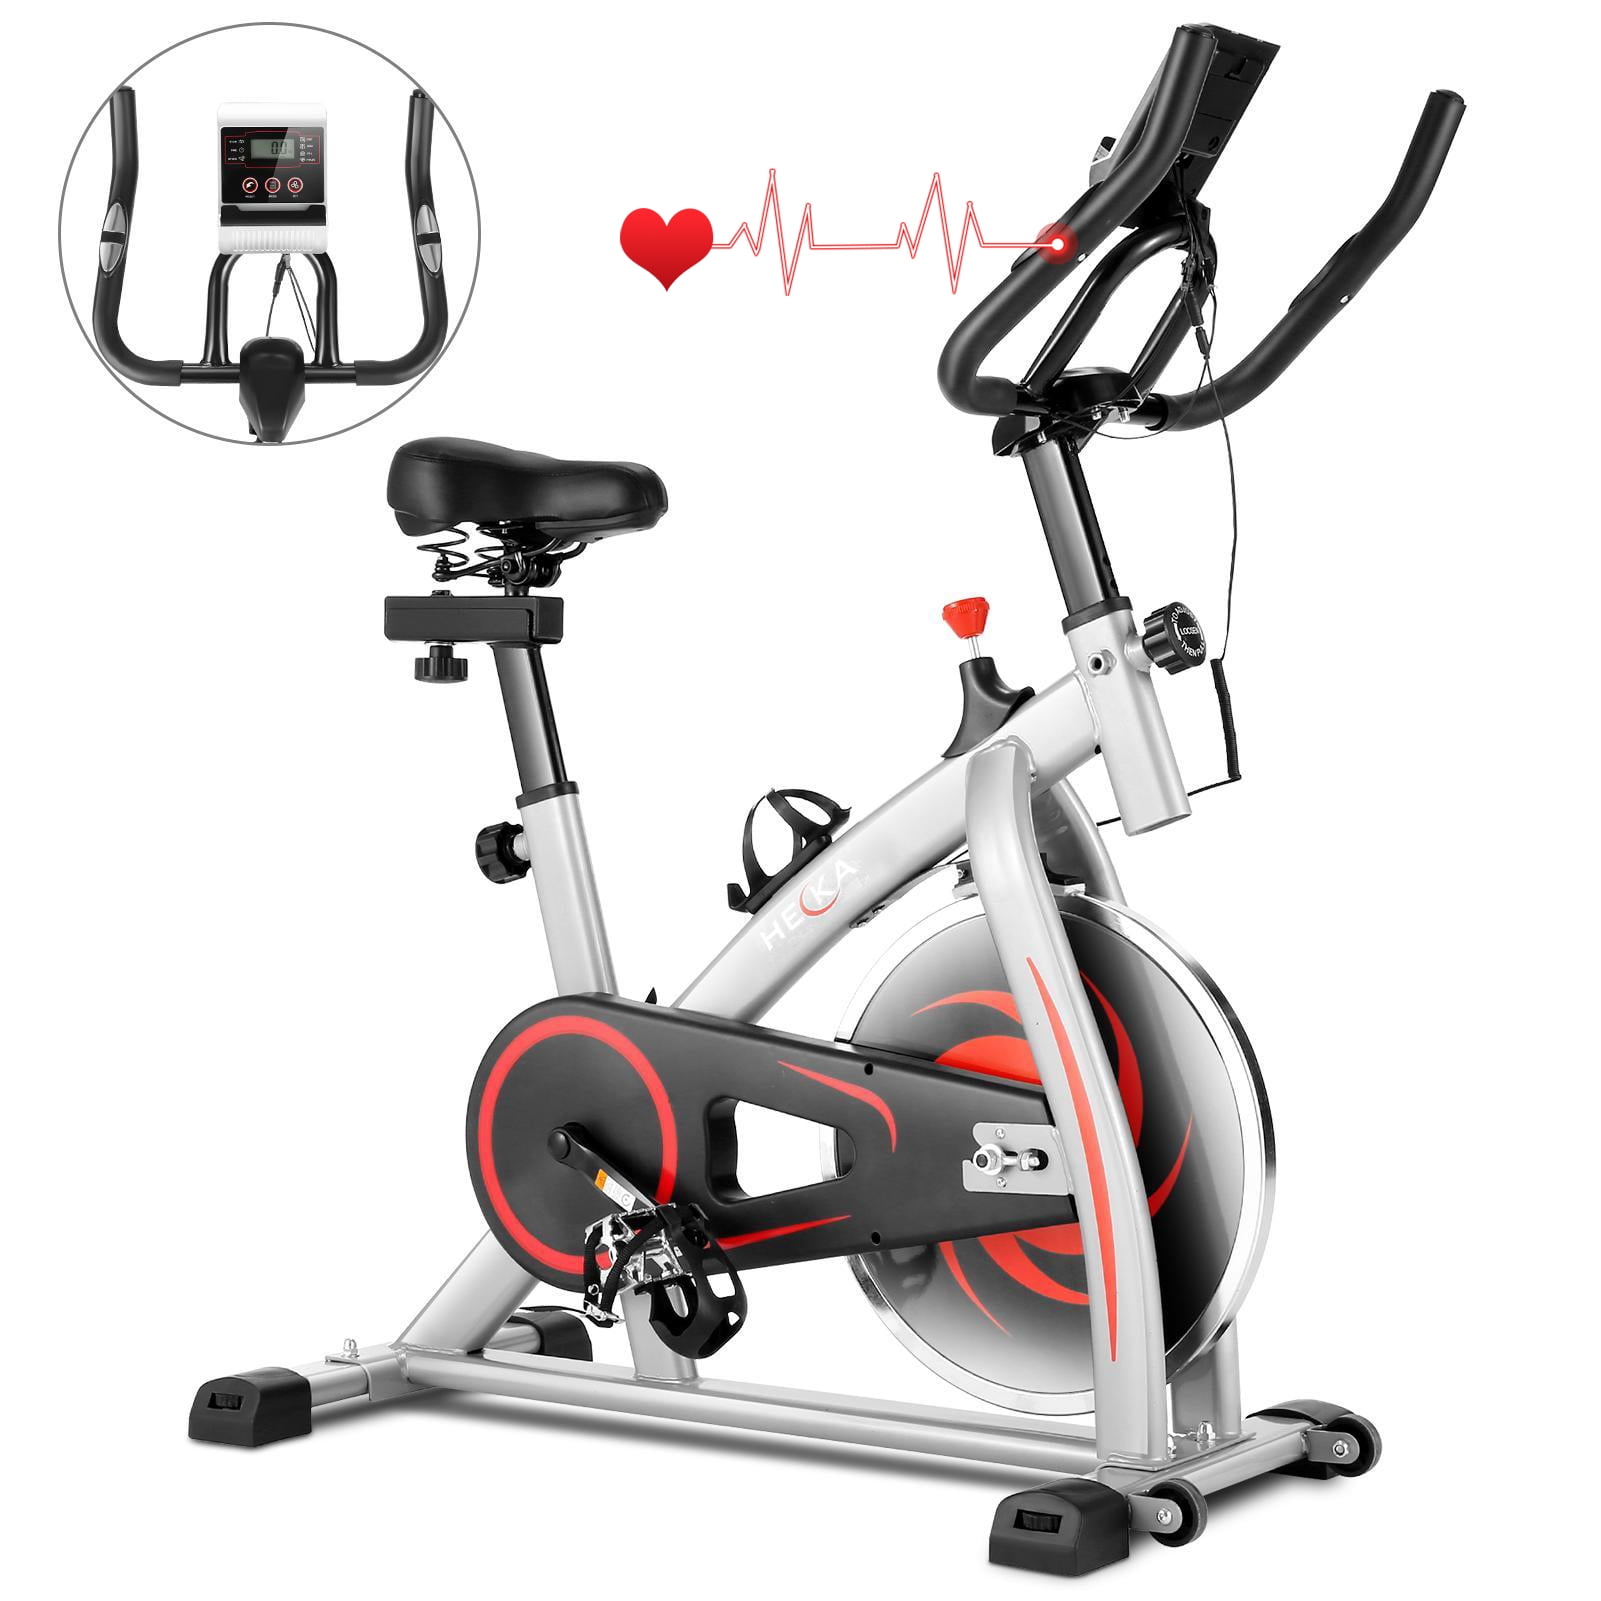 Details about   HEKA Indoor Stationary Exercise Bike Bicycle Cardio Cycling Training Trainer #~ 